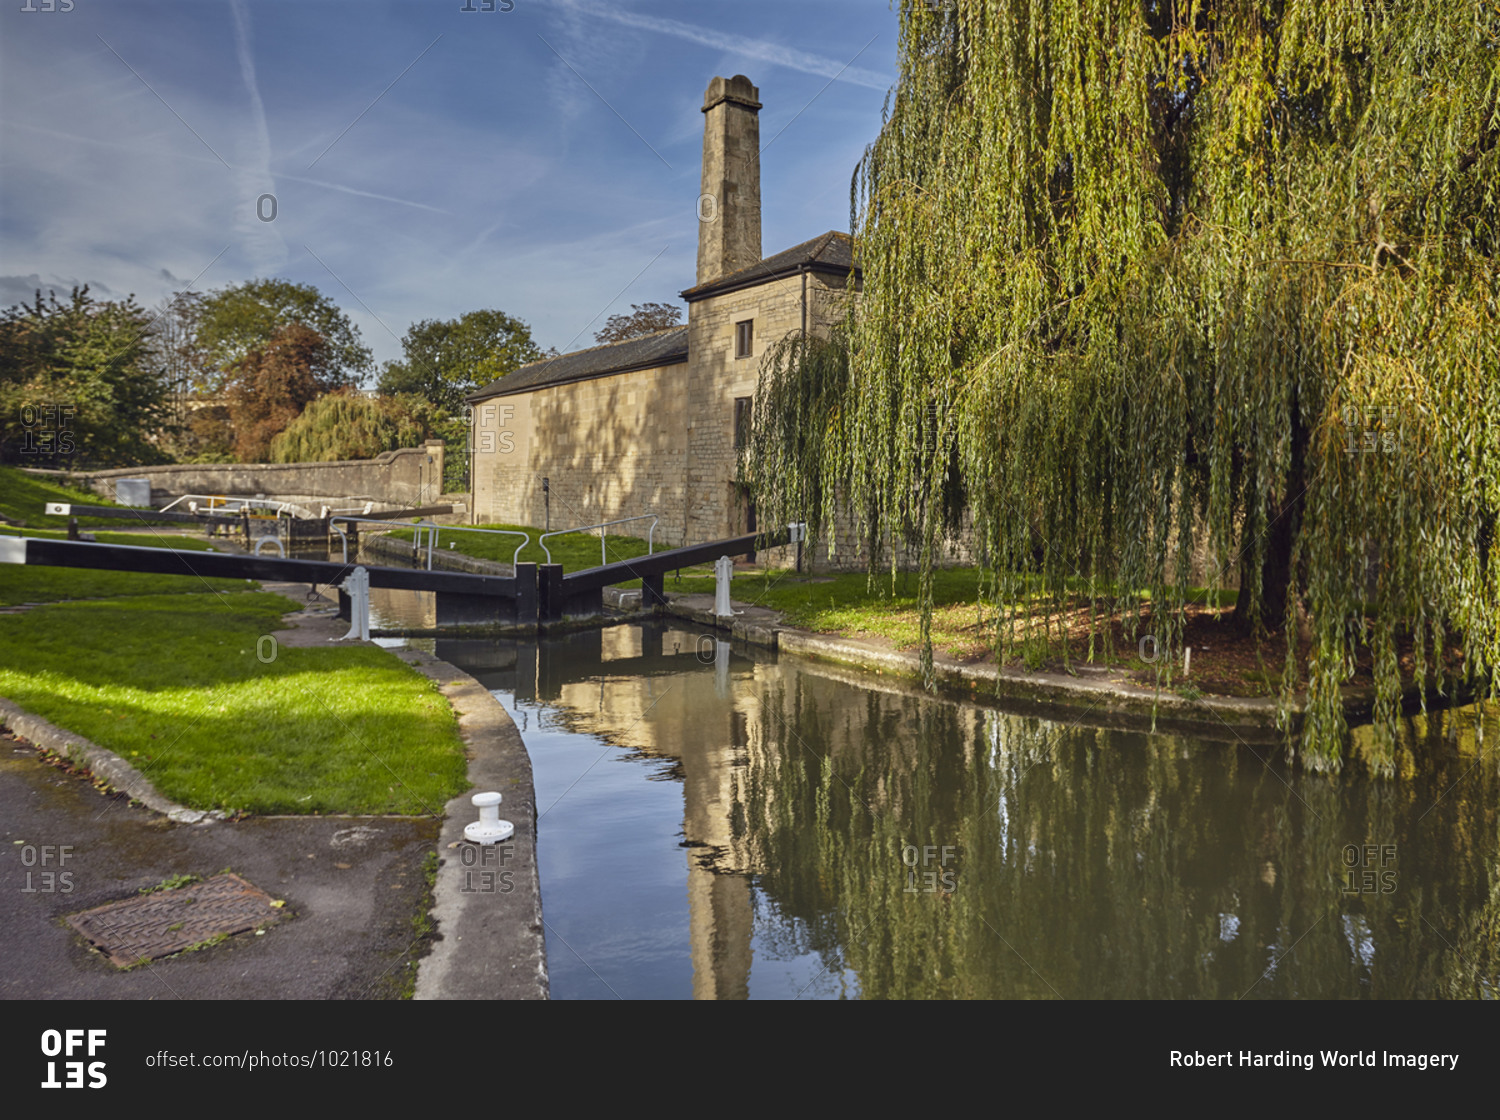 One of the first and last locks on the Kennet and Avon Canal at its junction with the River Avon, in Bath, Somerset, England, United Kingdom, Europe